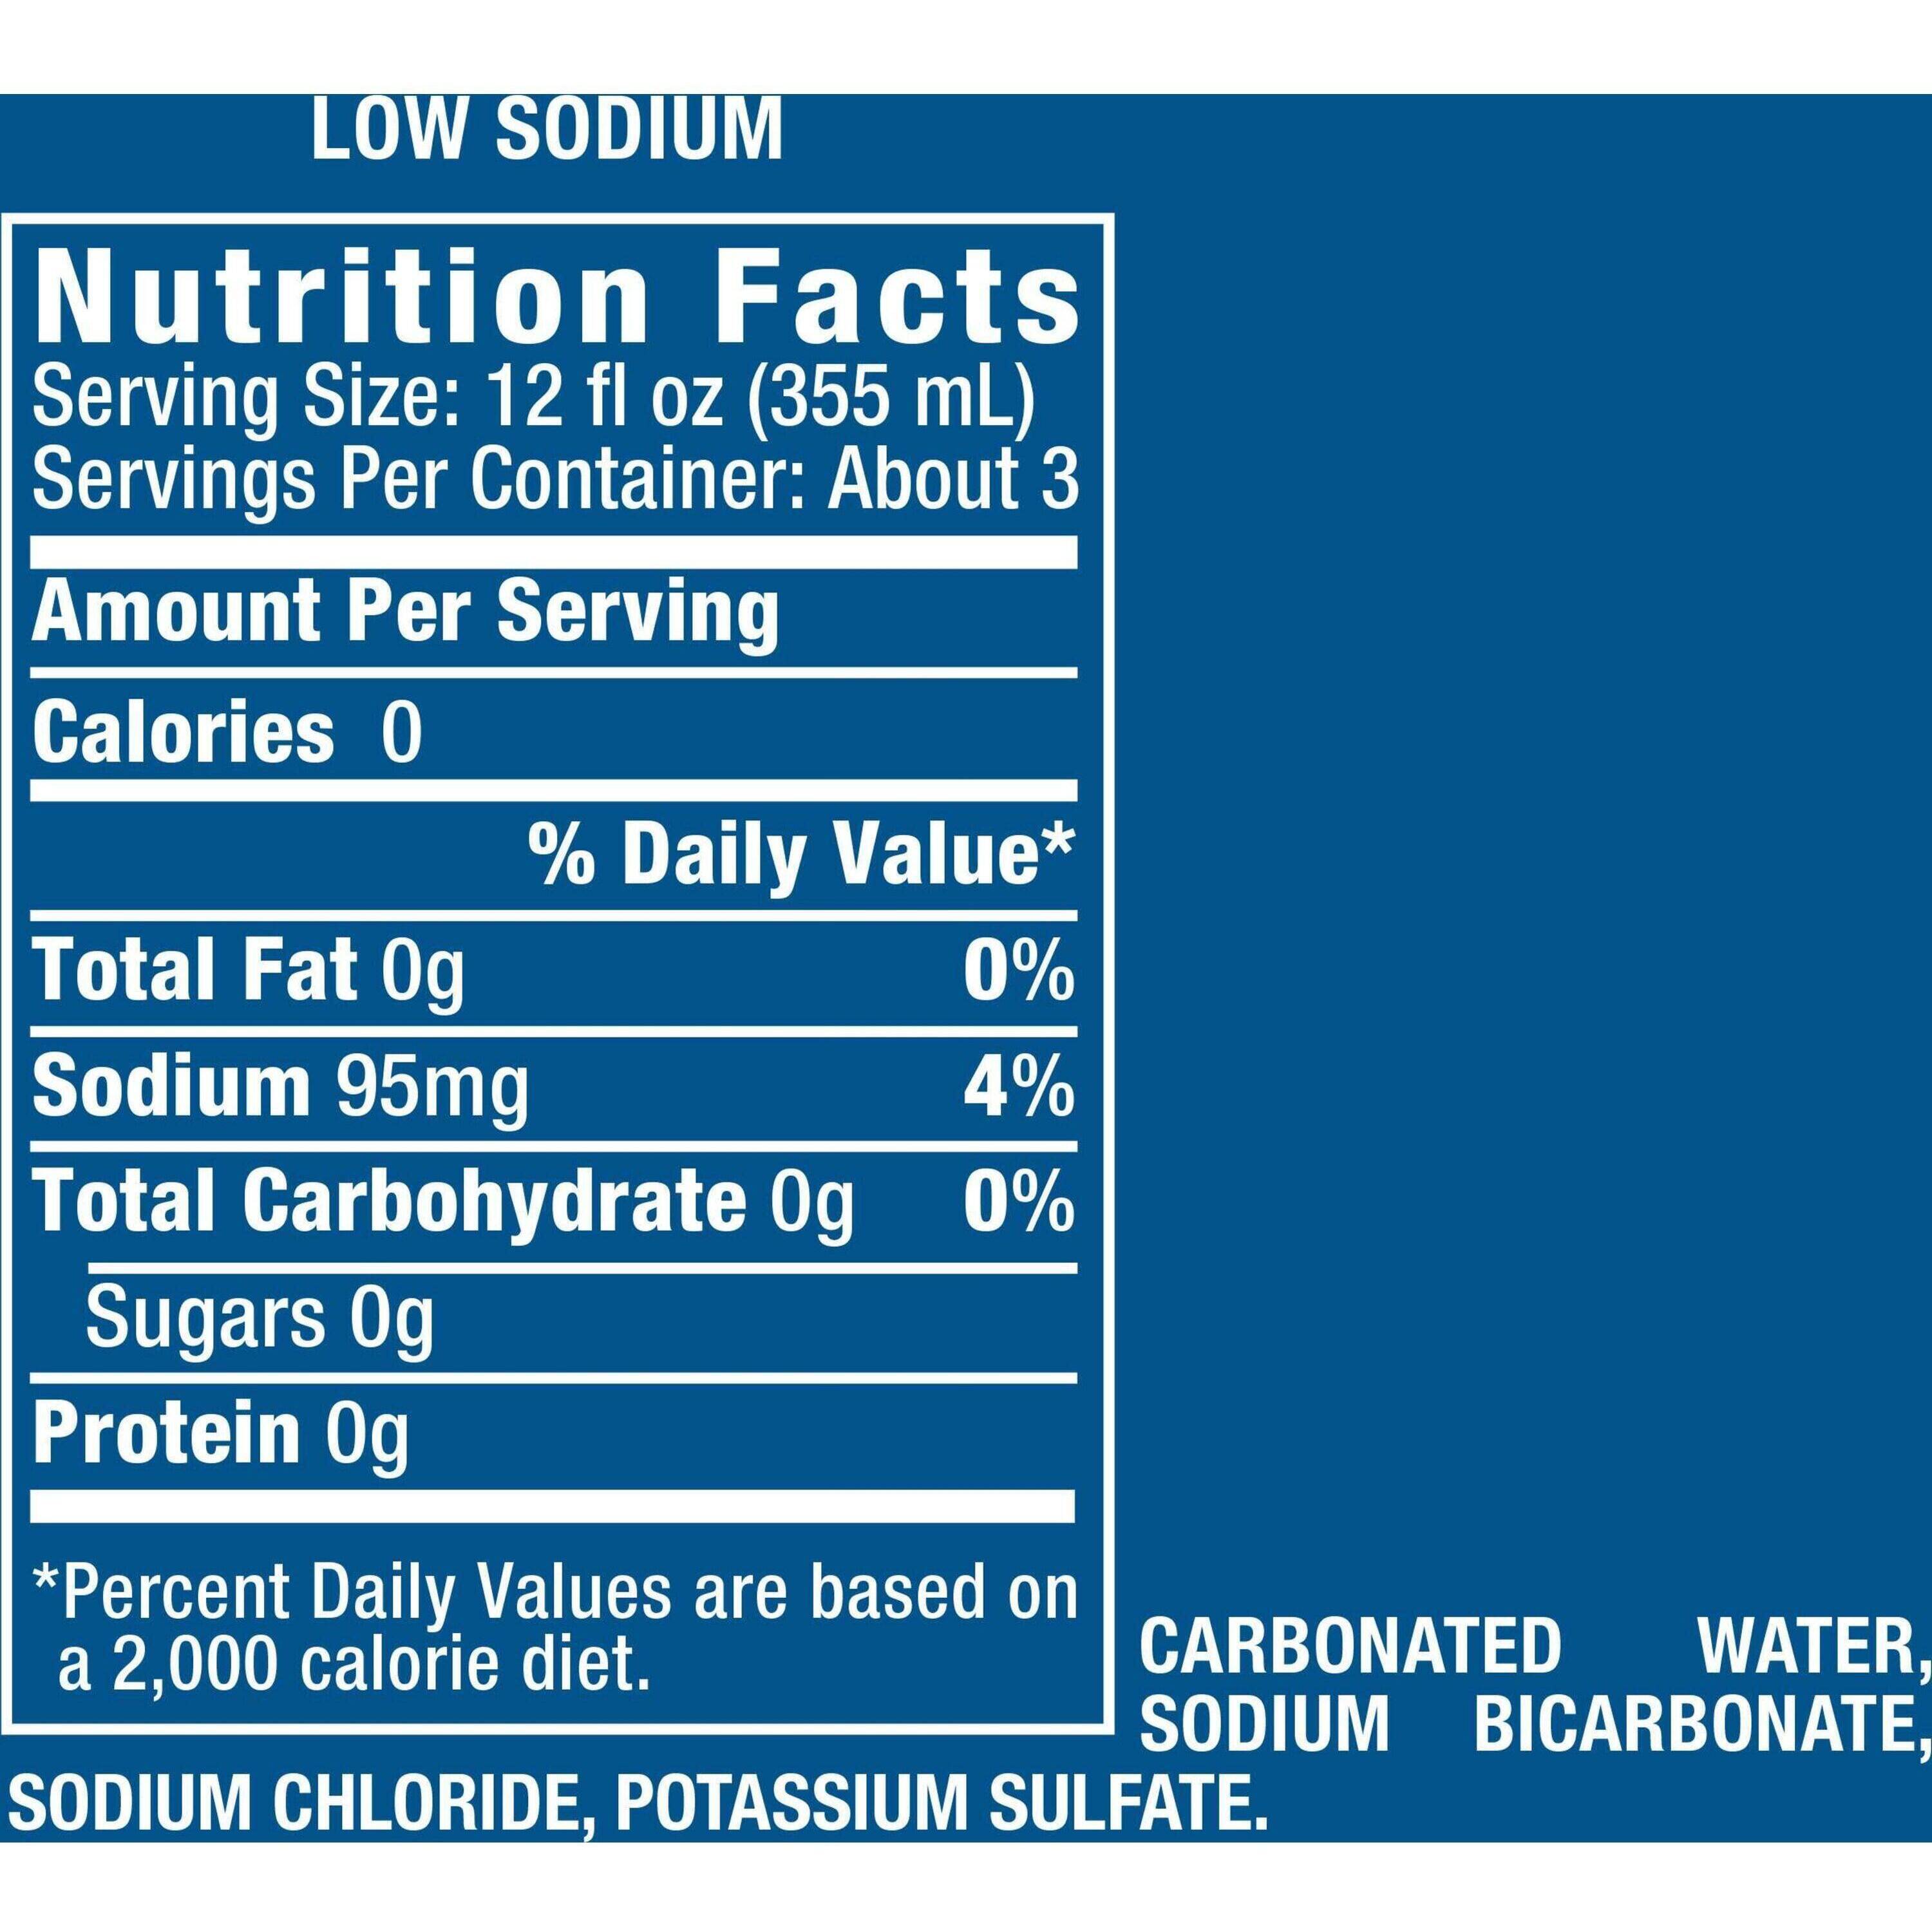 Image describing nutrition information for product Schweppes Club Soda